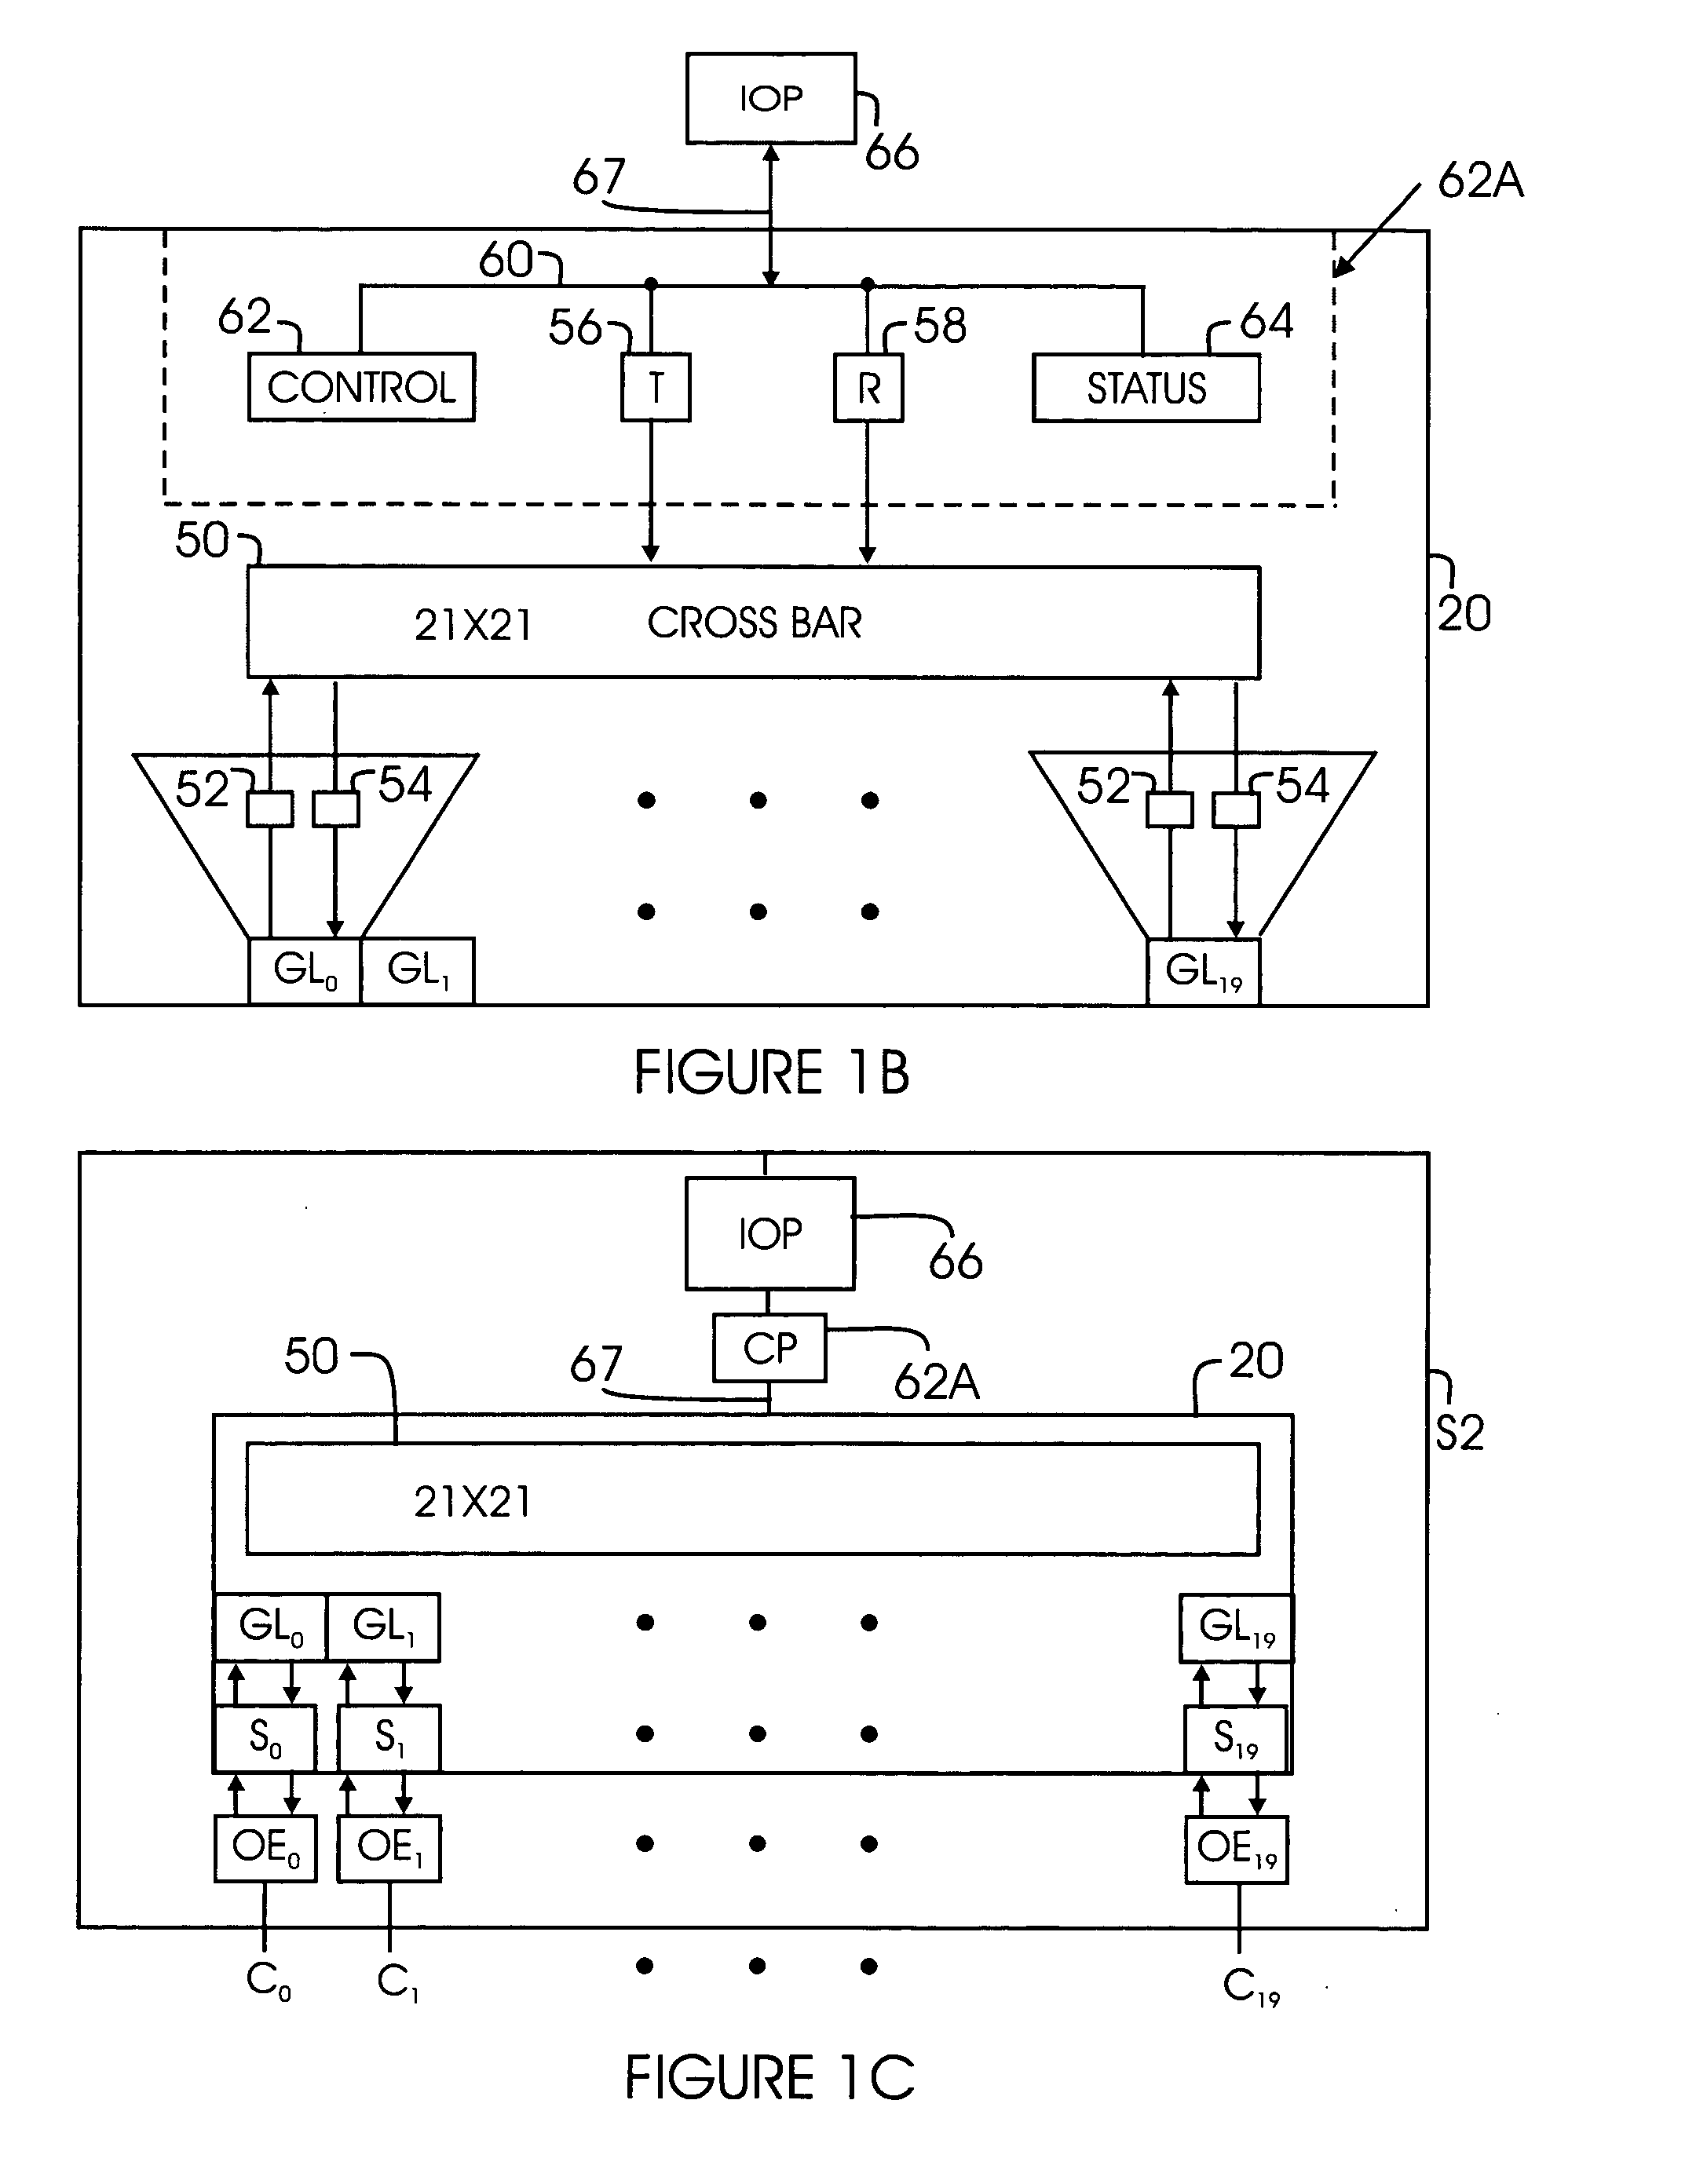 Method and system for using extended fabric features with fibre channel switch elements